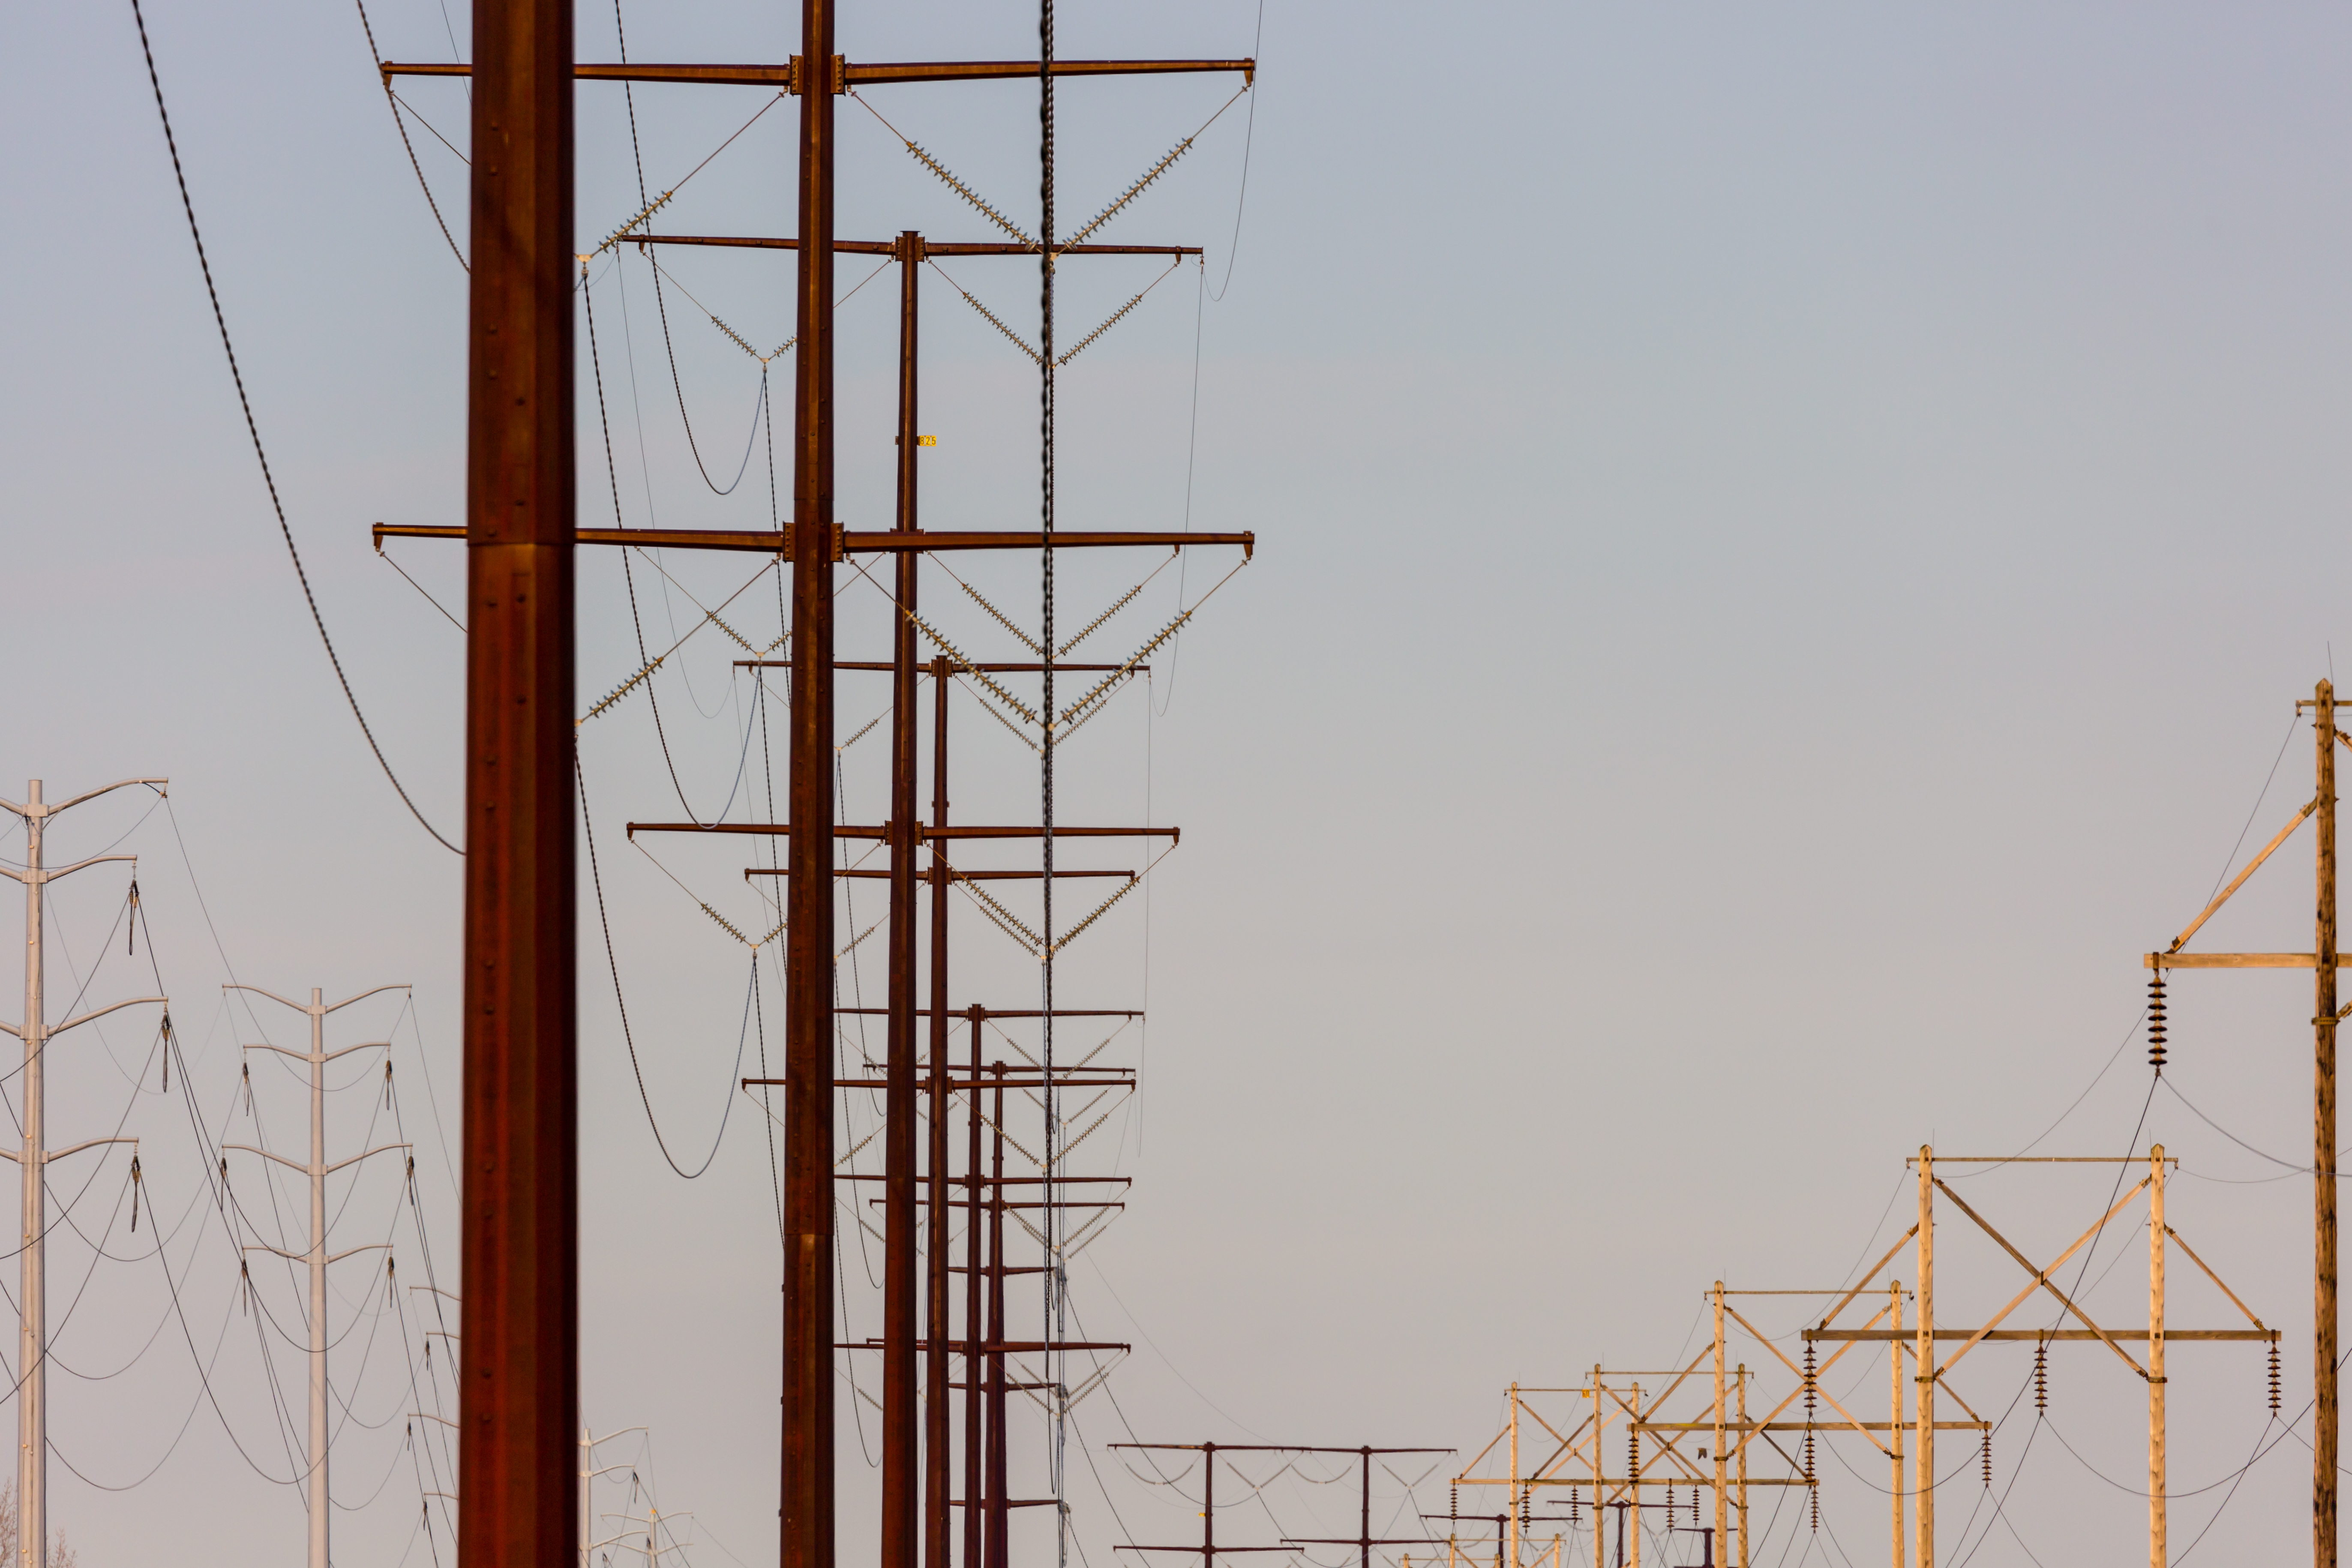 picture of transmission lines